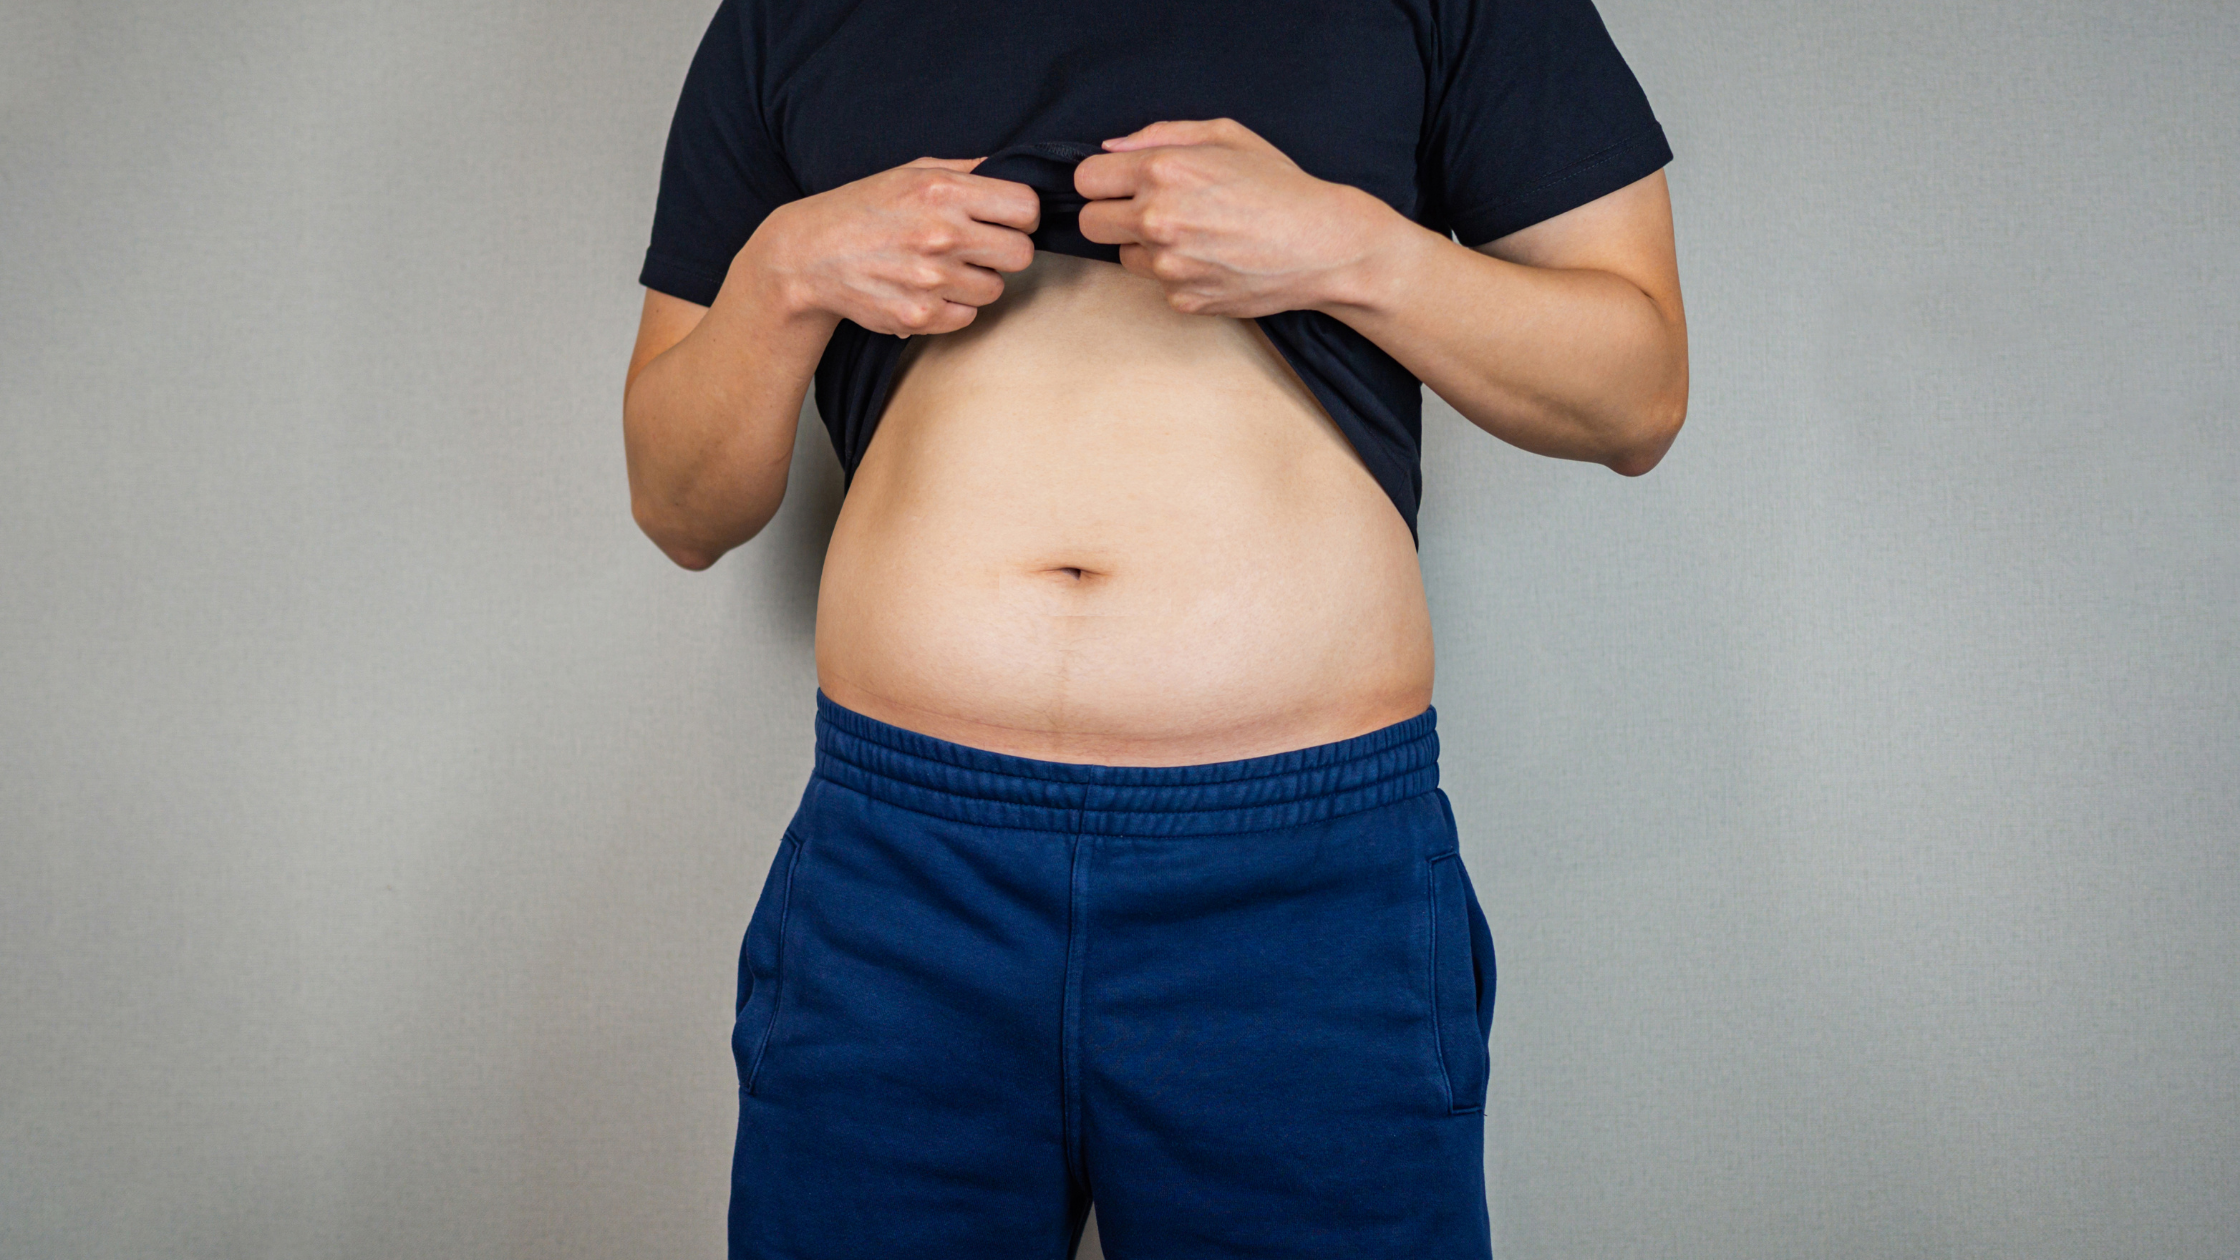 3 Reasons Why Male Tummy Tuck Surgery May Not Be Exactly What You Think It Is